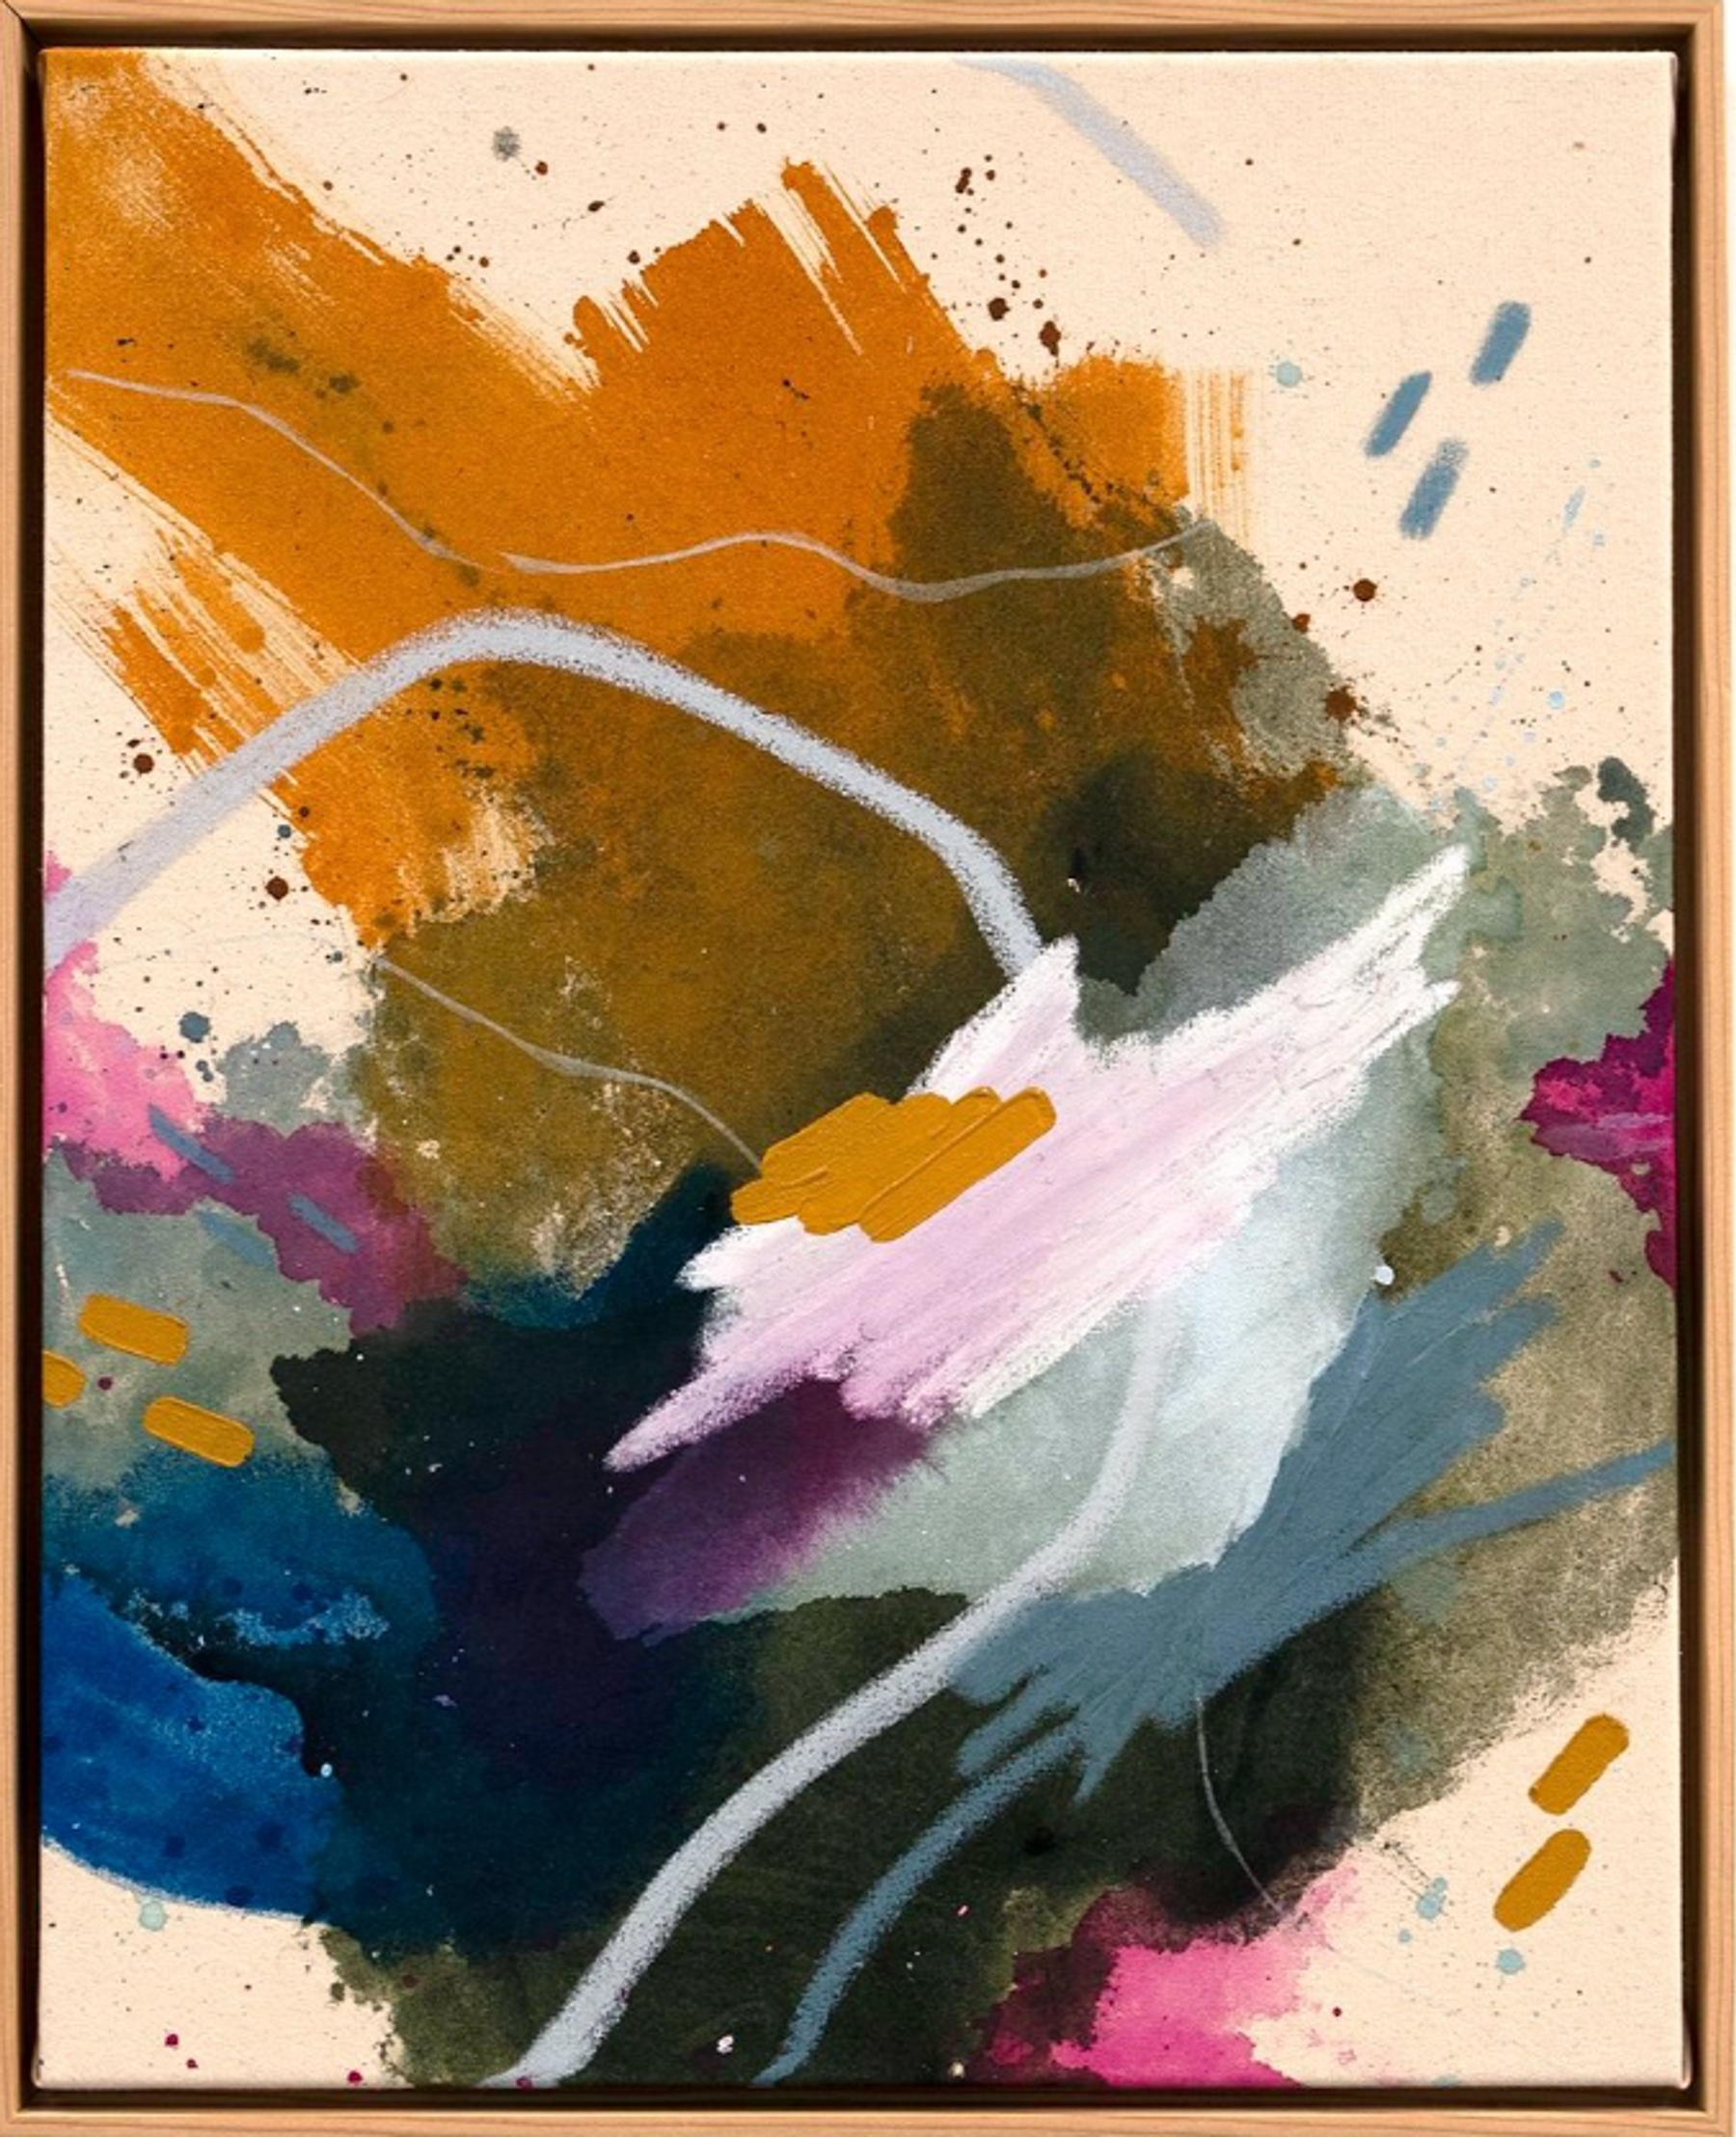 An abstract painting with large orange, purple, dark blue, and green brushstrokes.